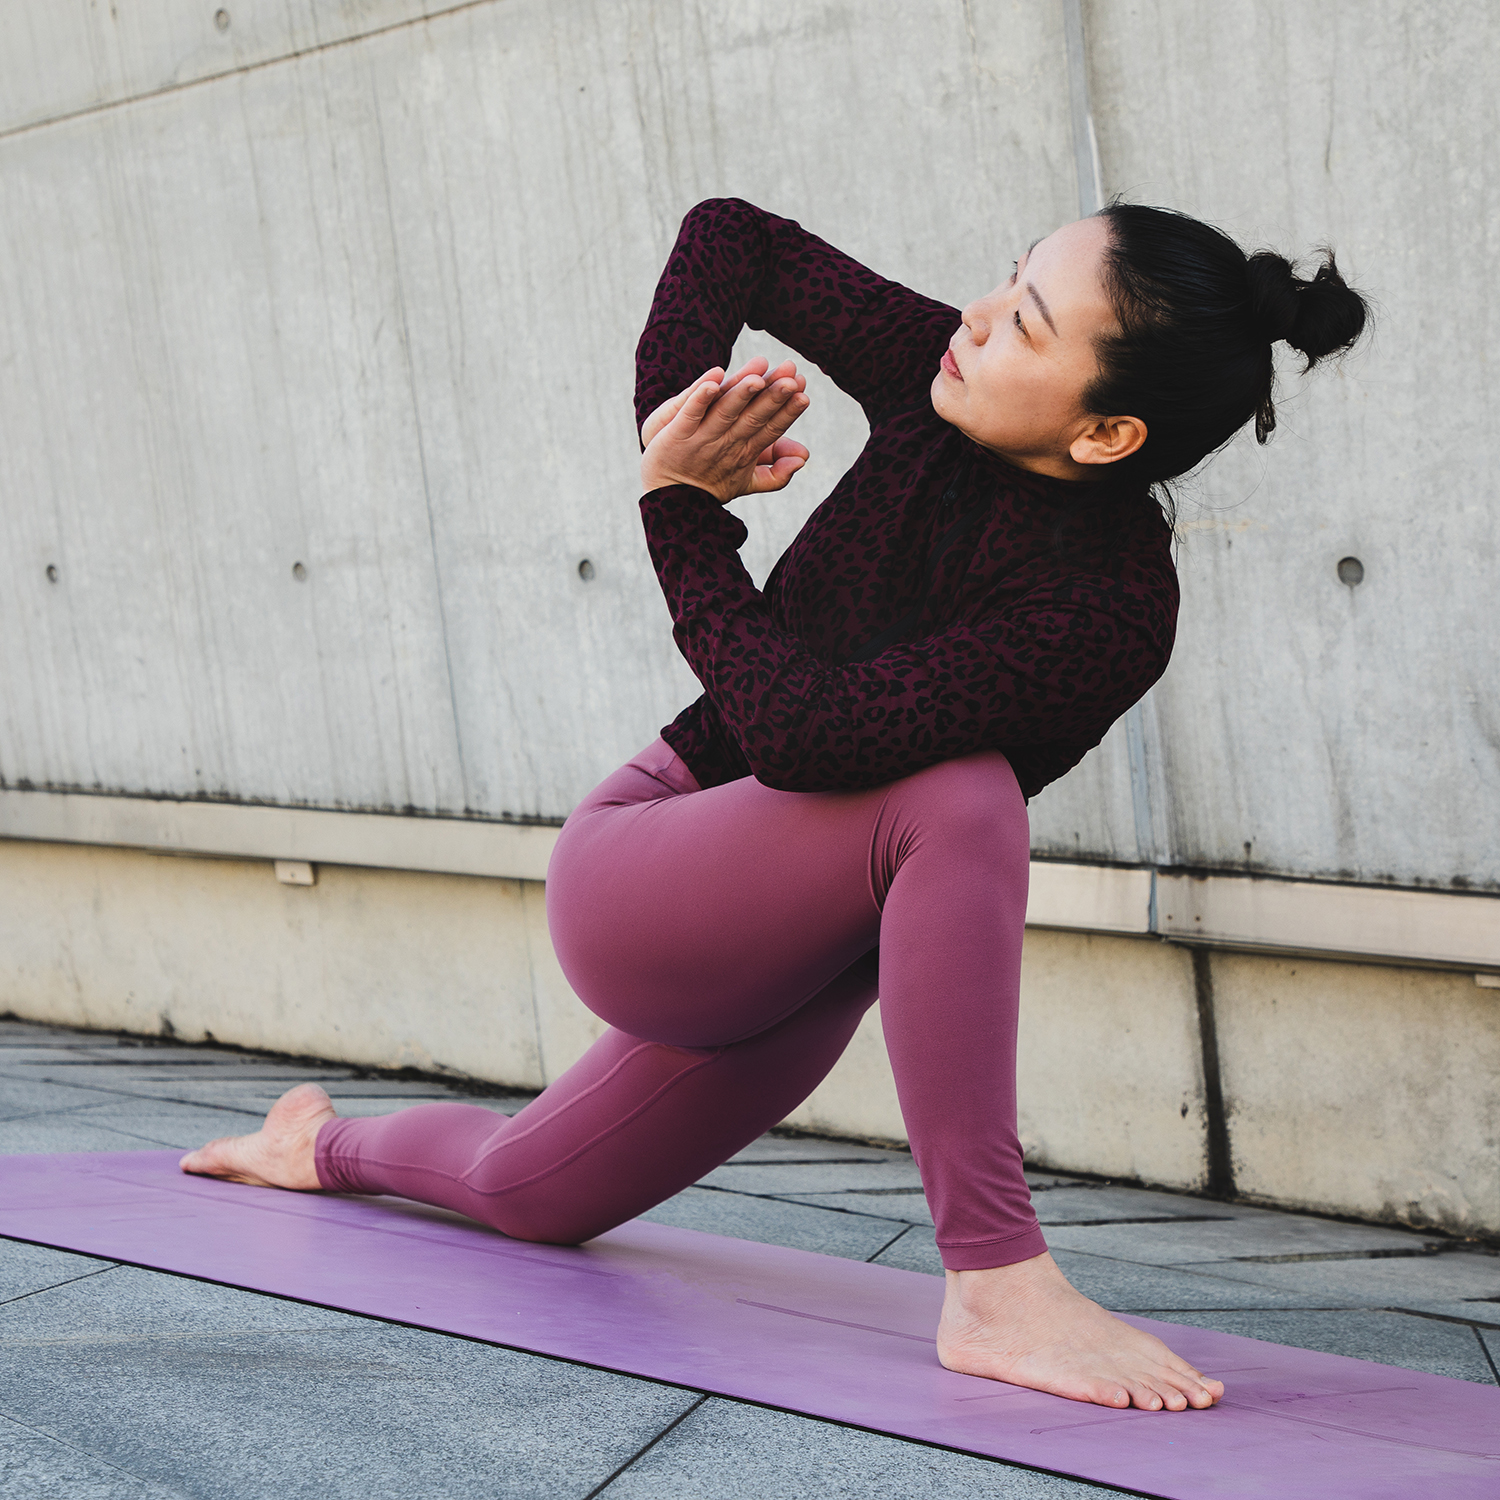 7 Easy Yoga Poses That Everyone Should Know